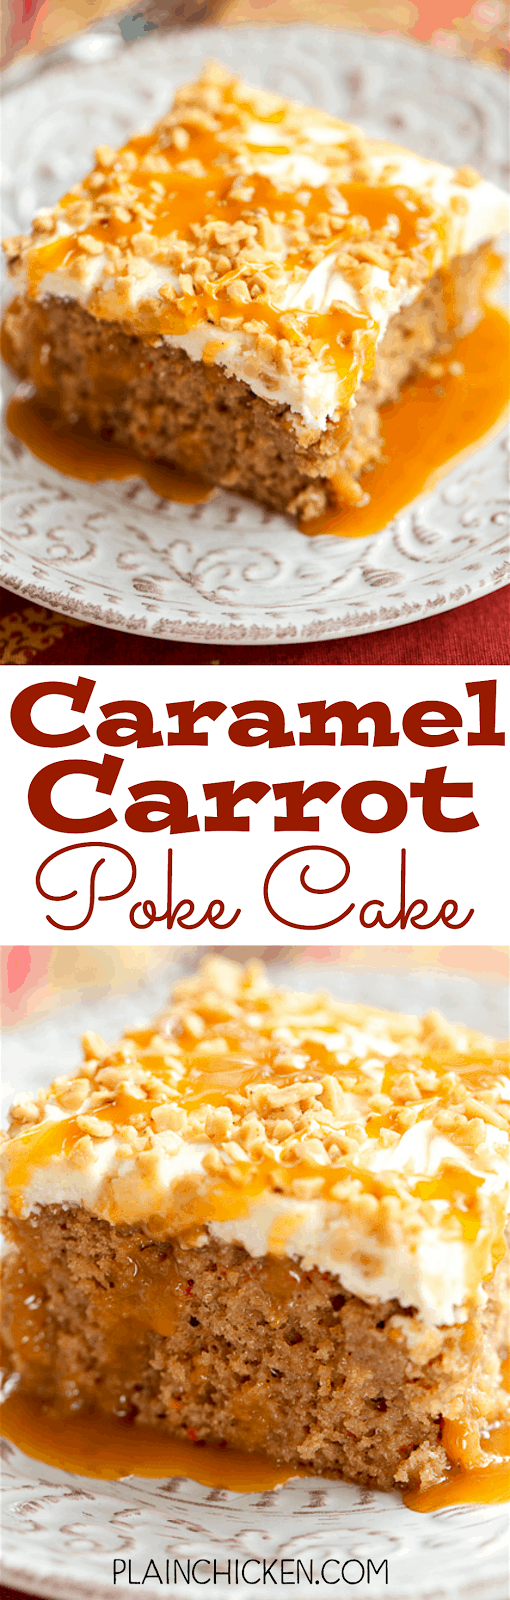 Caramel Carrot Poke Cake - carrot cake soaked in sweetened condensed milk and caramel and topped with a quick homemade cream cheese frosting. SO good! Great for potlucks and the holidays. 